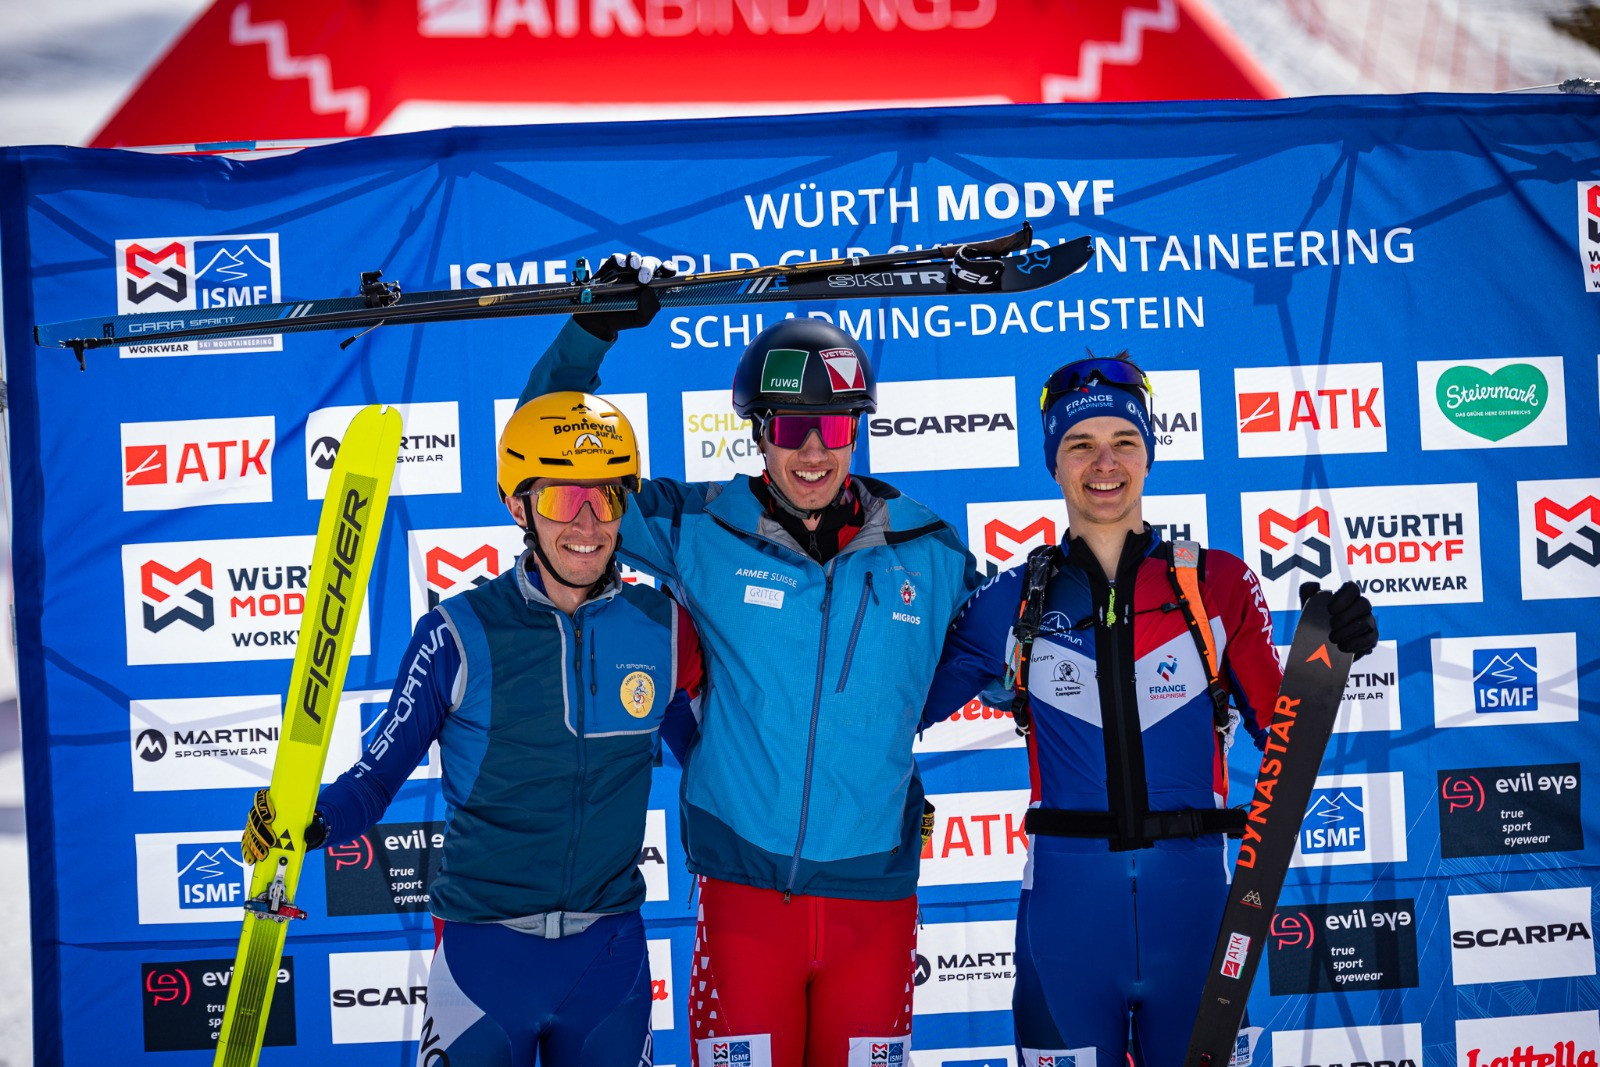 Switzerland's Arno Lietha won the men's sprint race at the International Ski Mountaineering Federation World Cup at the Austrian resort of Schladming ©ISMF